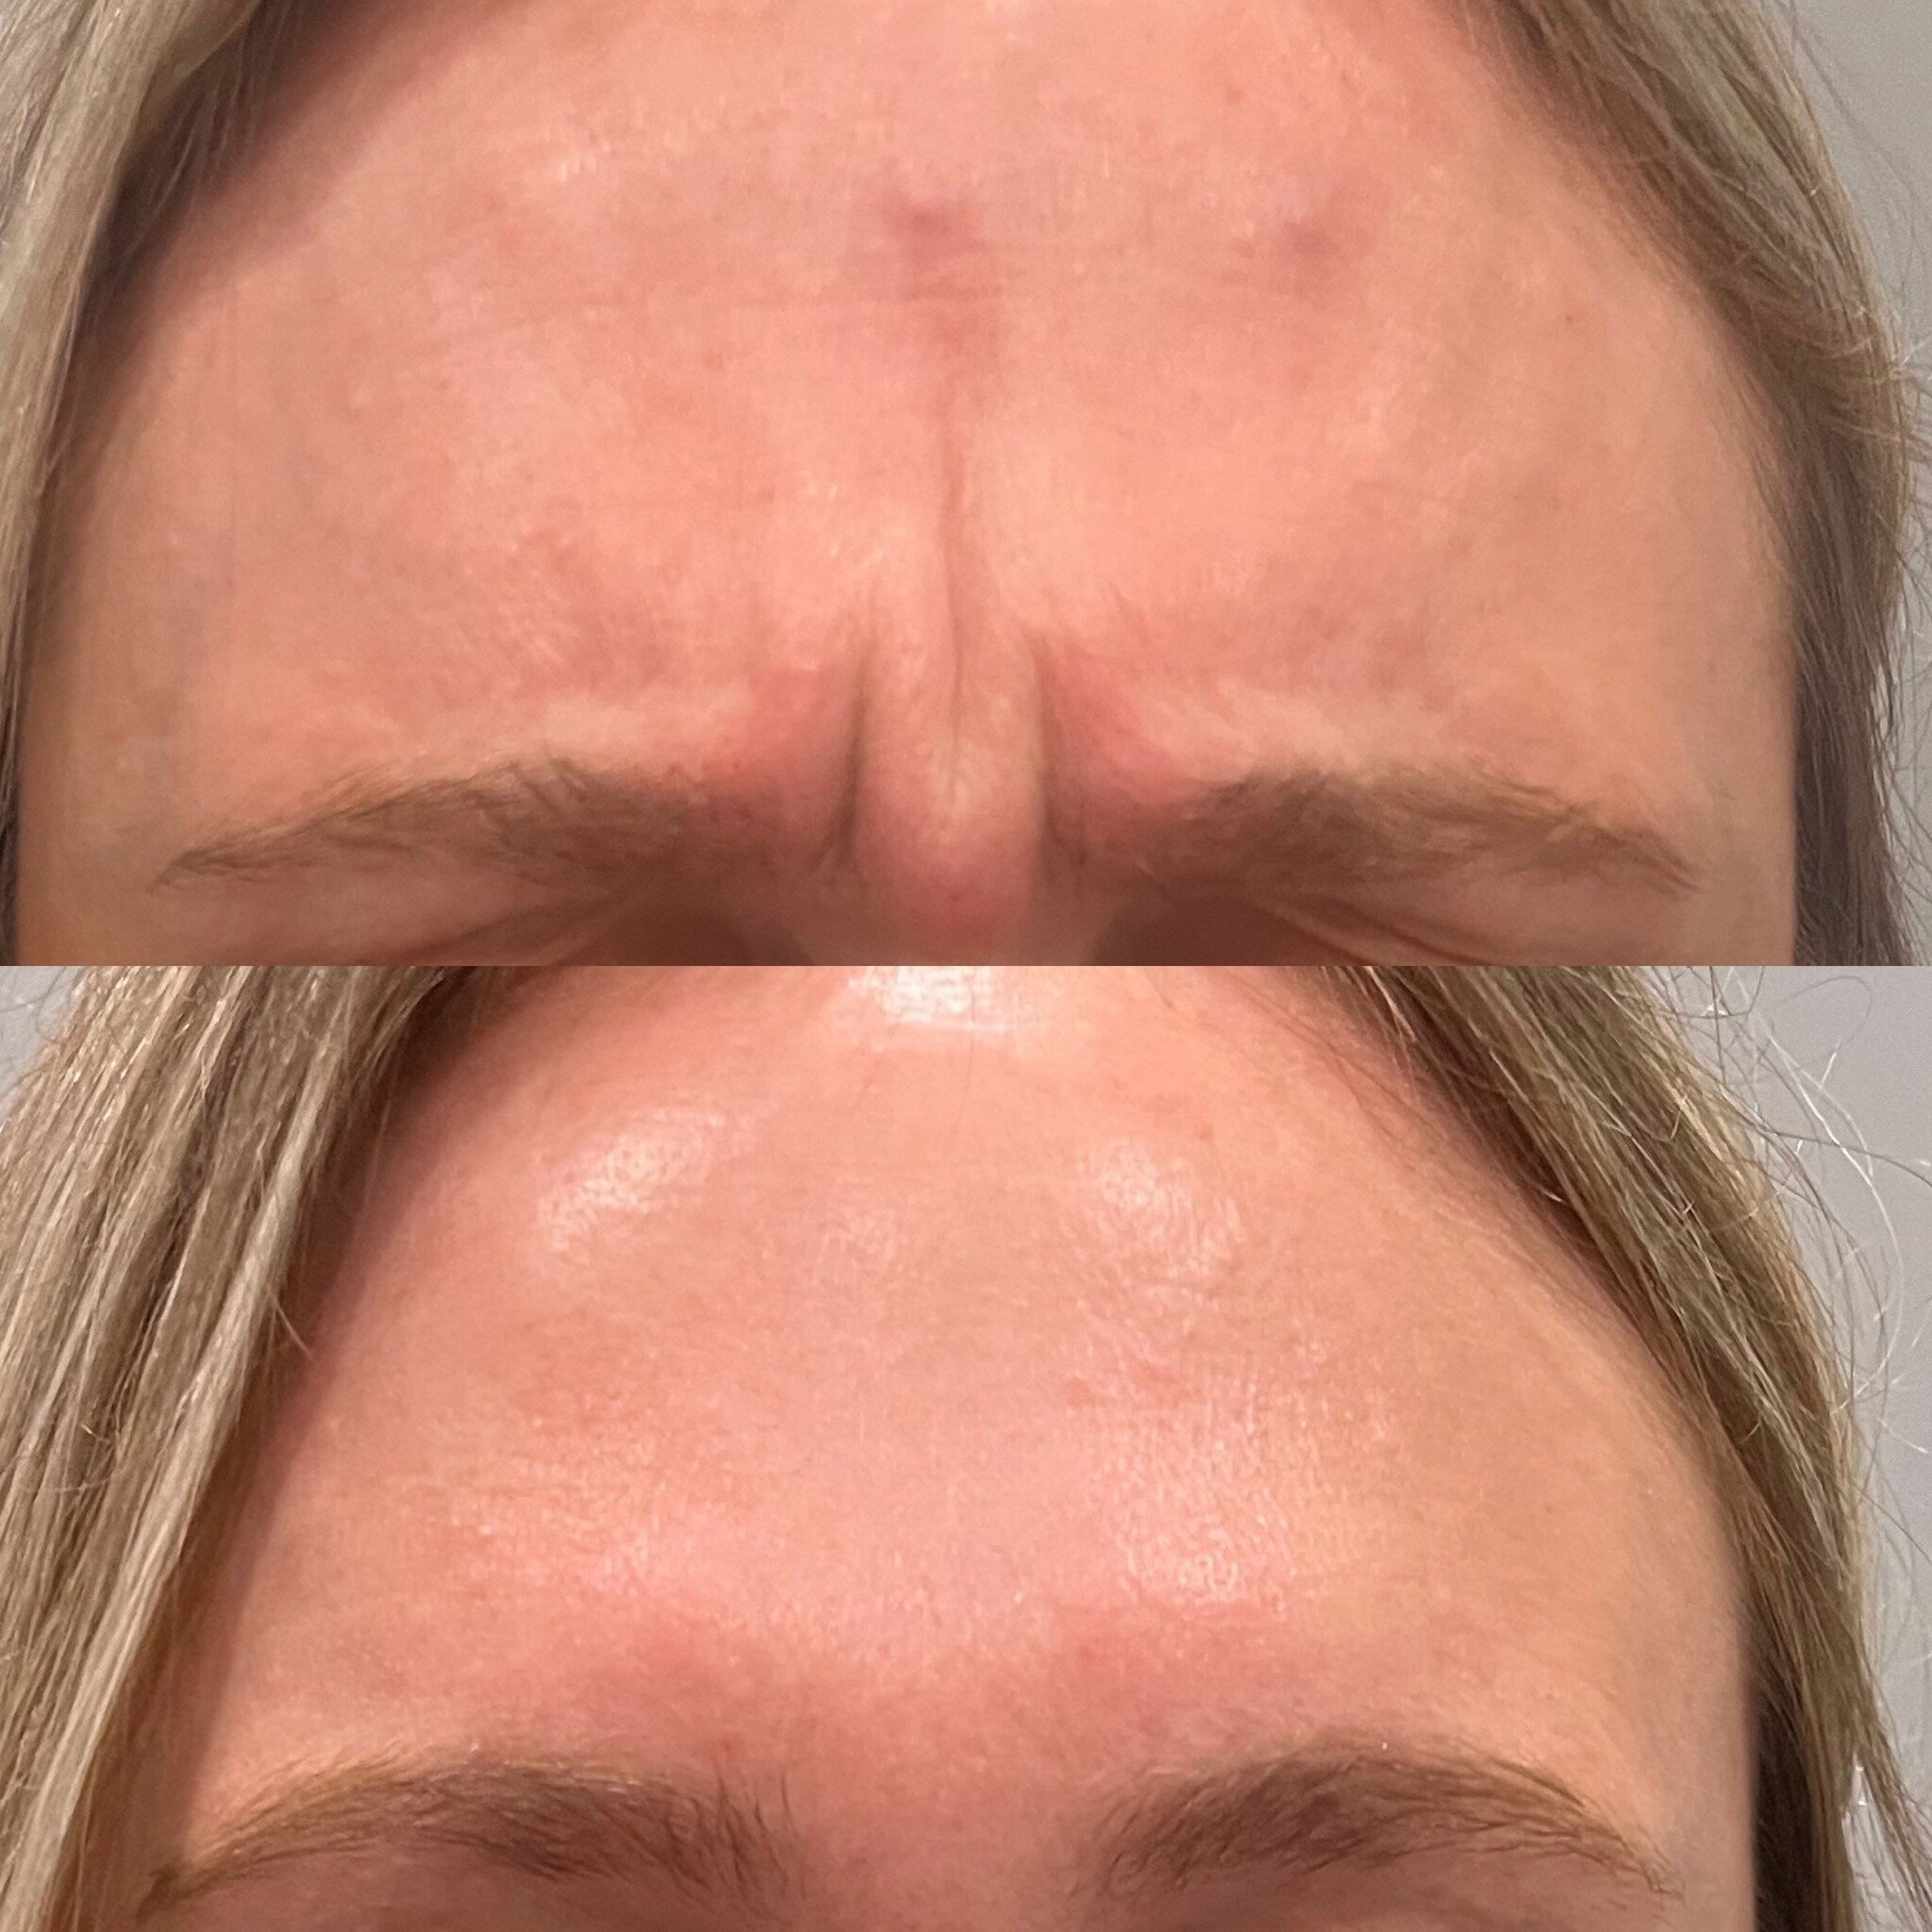 SLB is giving you smooth foreheads and no frowns in all of Temiskaming Shores &amp; Collingwood! 

This beautiful client came in wanting some refreshing treatment and was thrilled with her results! 

Interested in what your dosing/cost would be for y